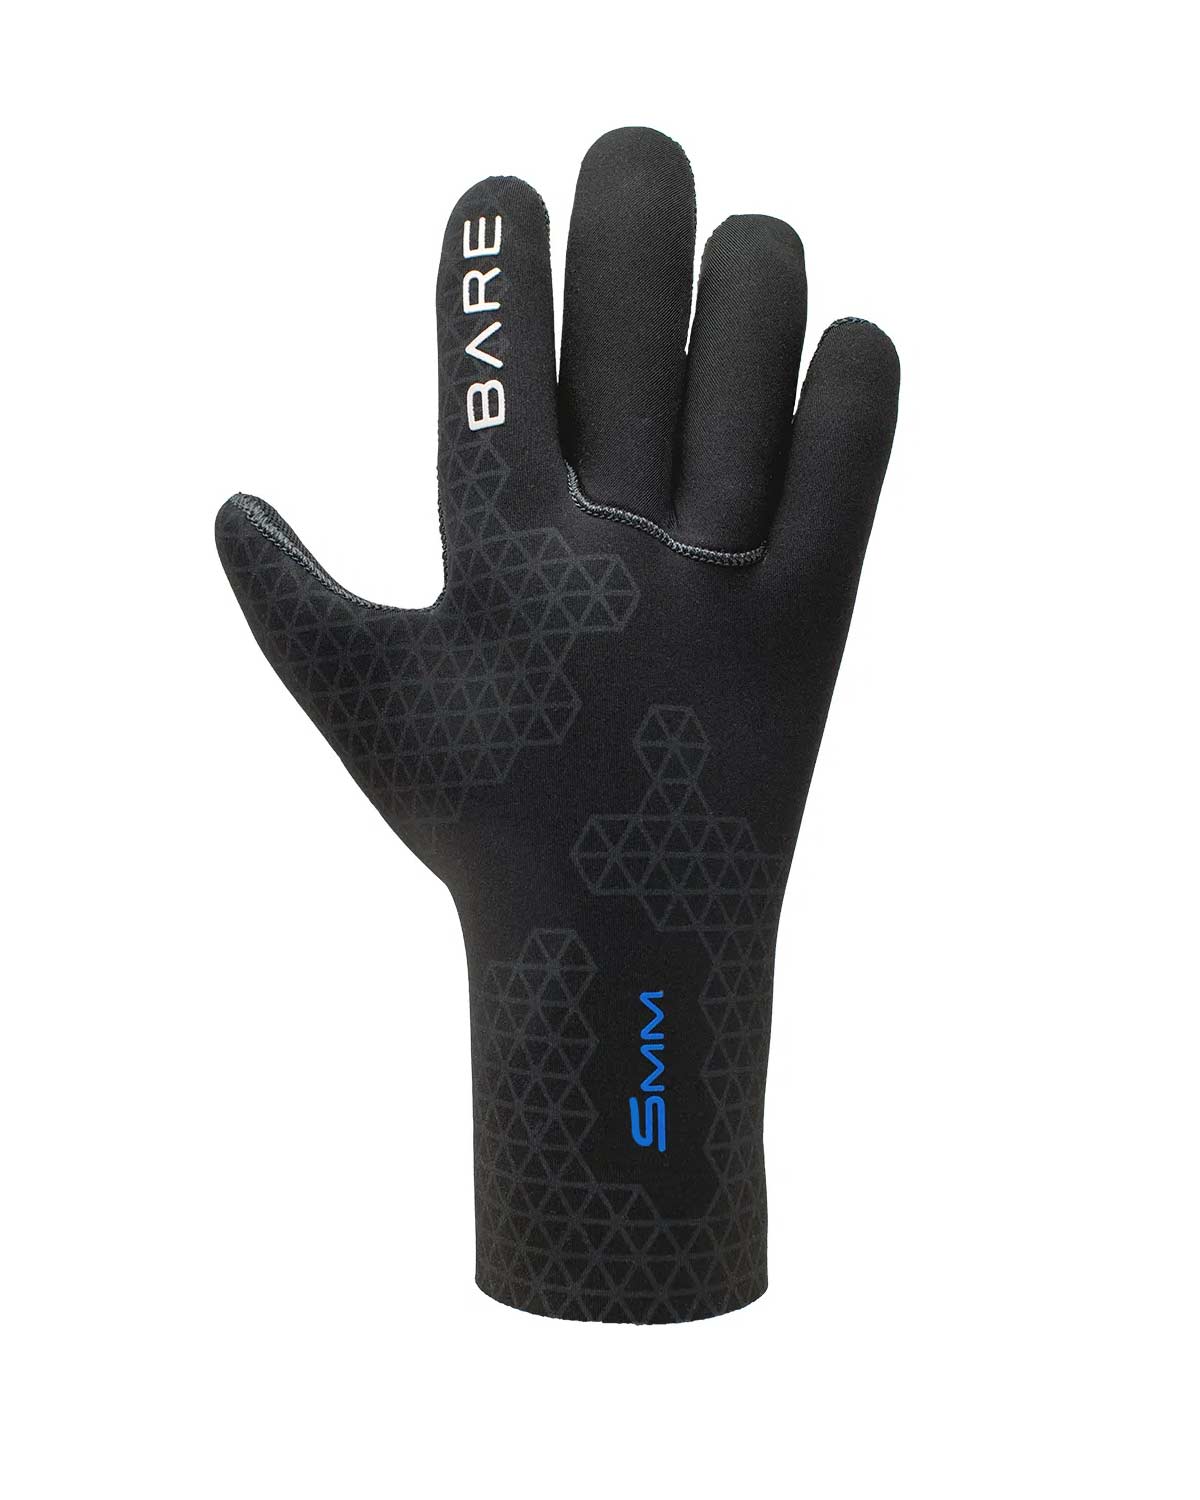 5mm BARE Wetsuit Gloves